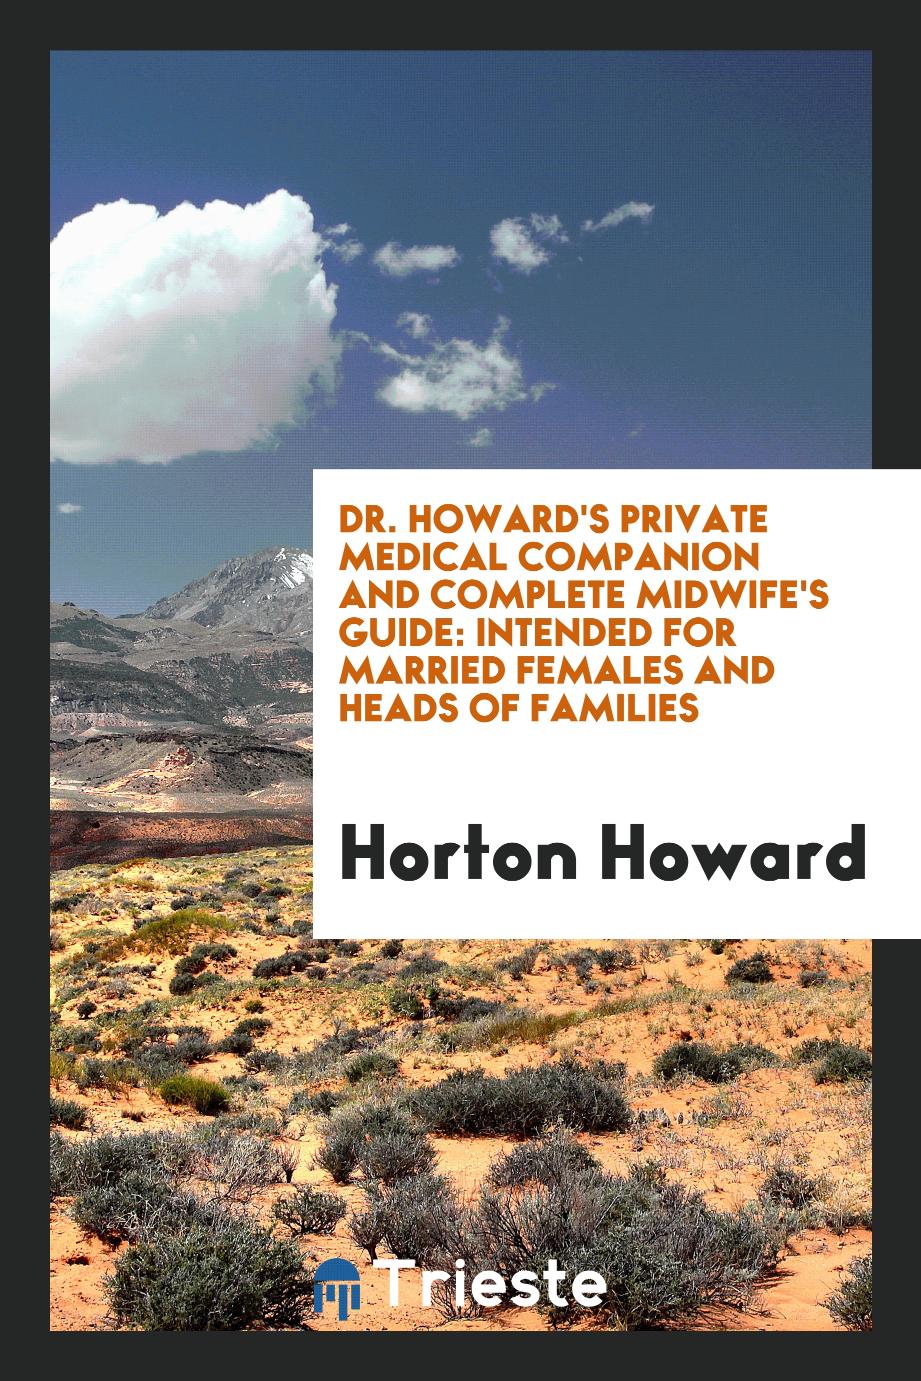 Dr. Howard's private medical companion and complete midwife's guide: Intended for Married females and heads of families